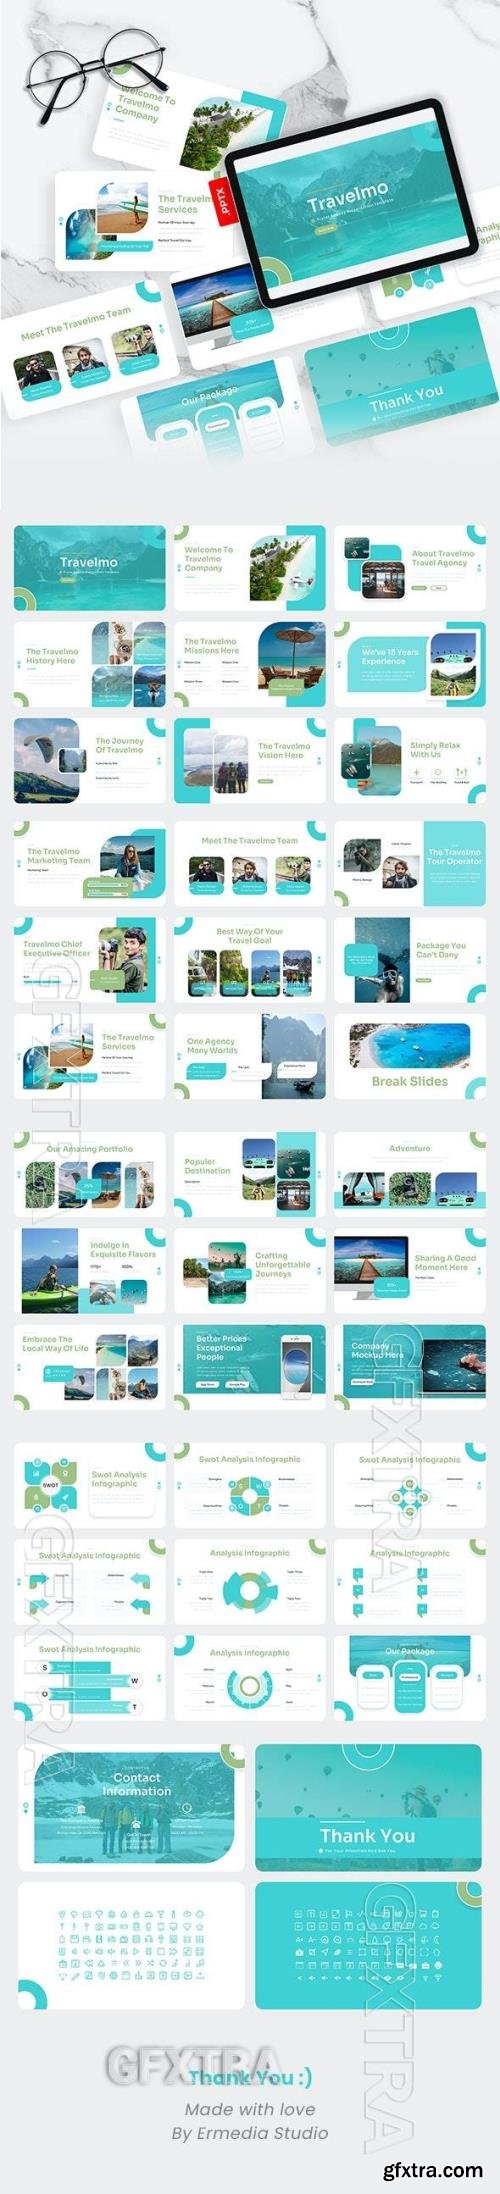 Travelmo - Travel Agency PowerPoint Template 49674774